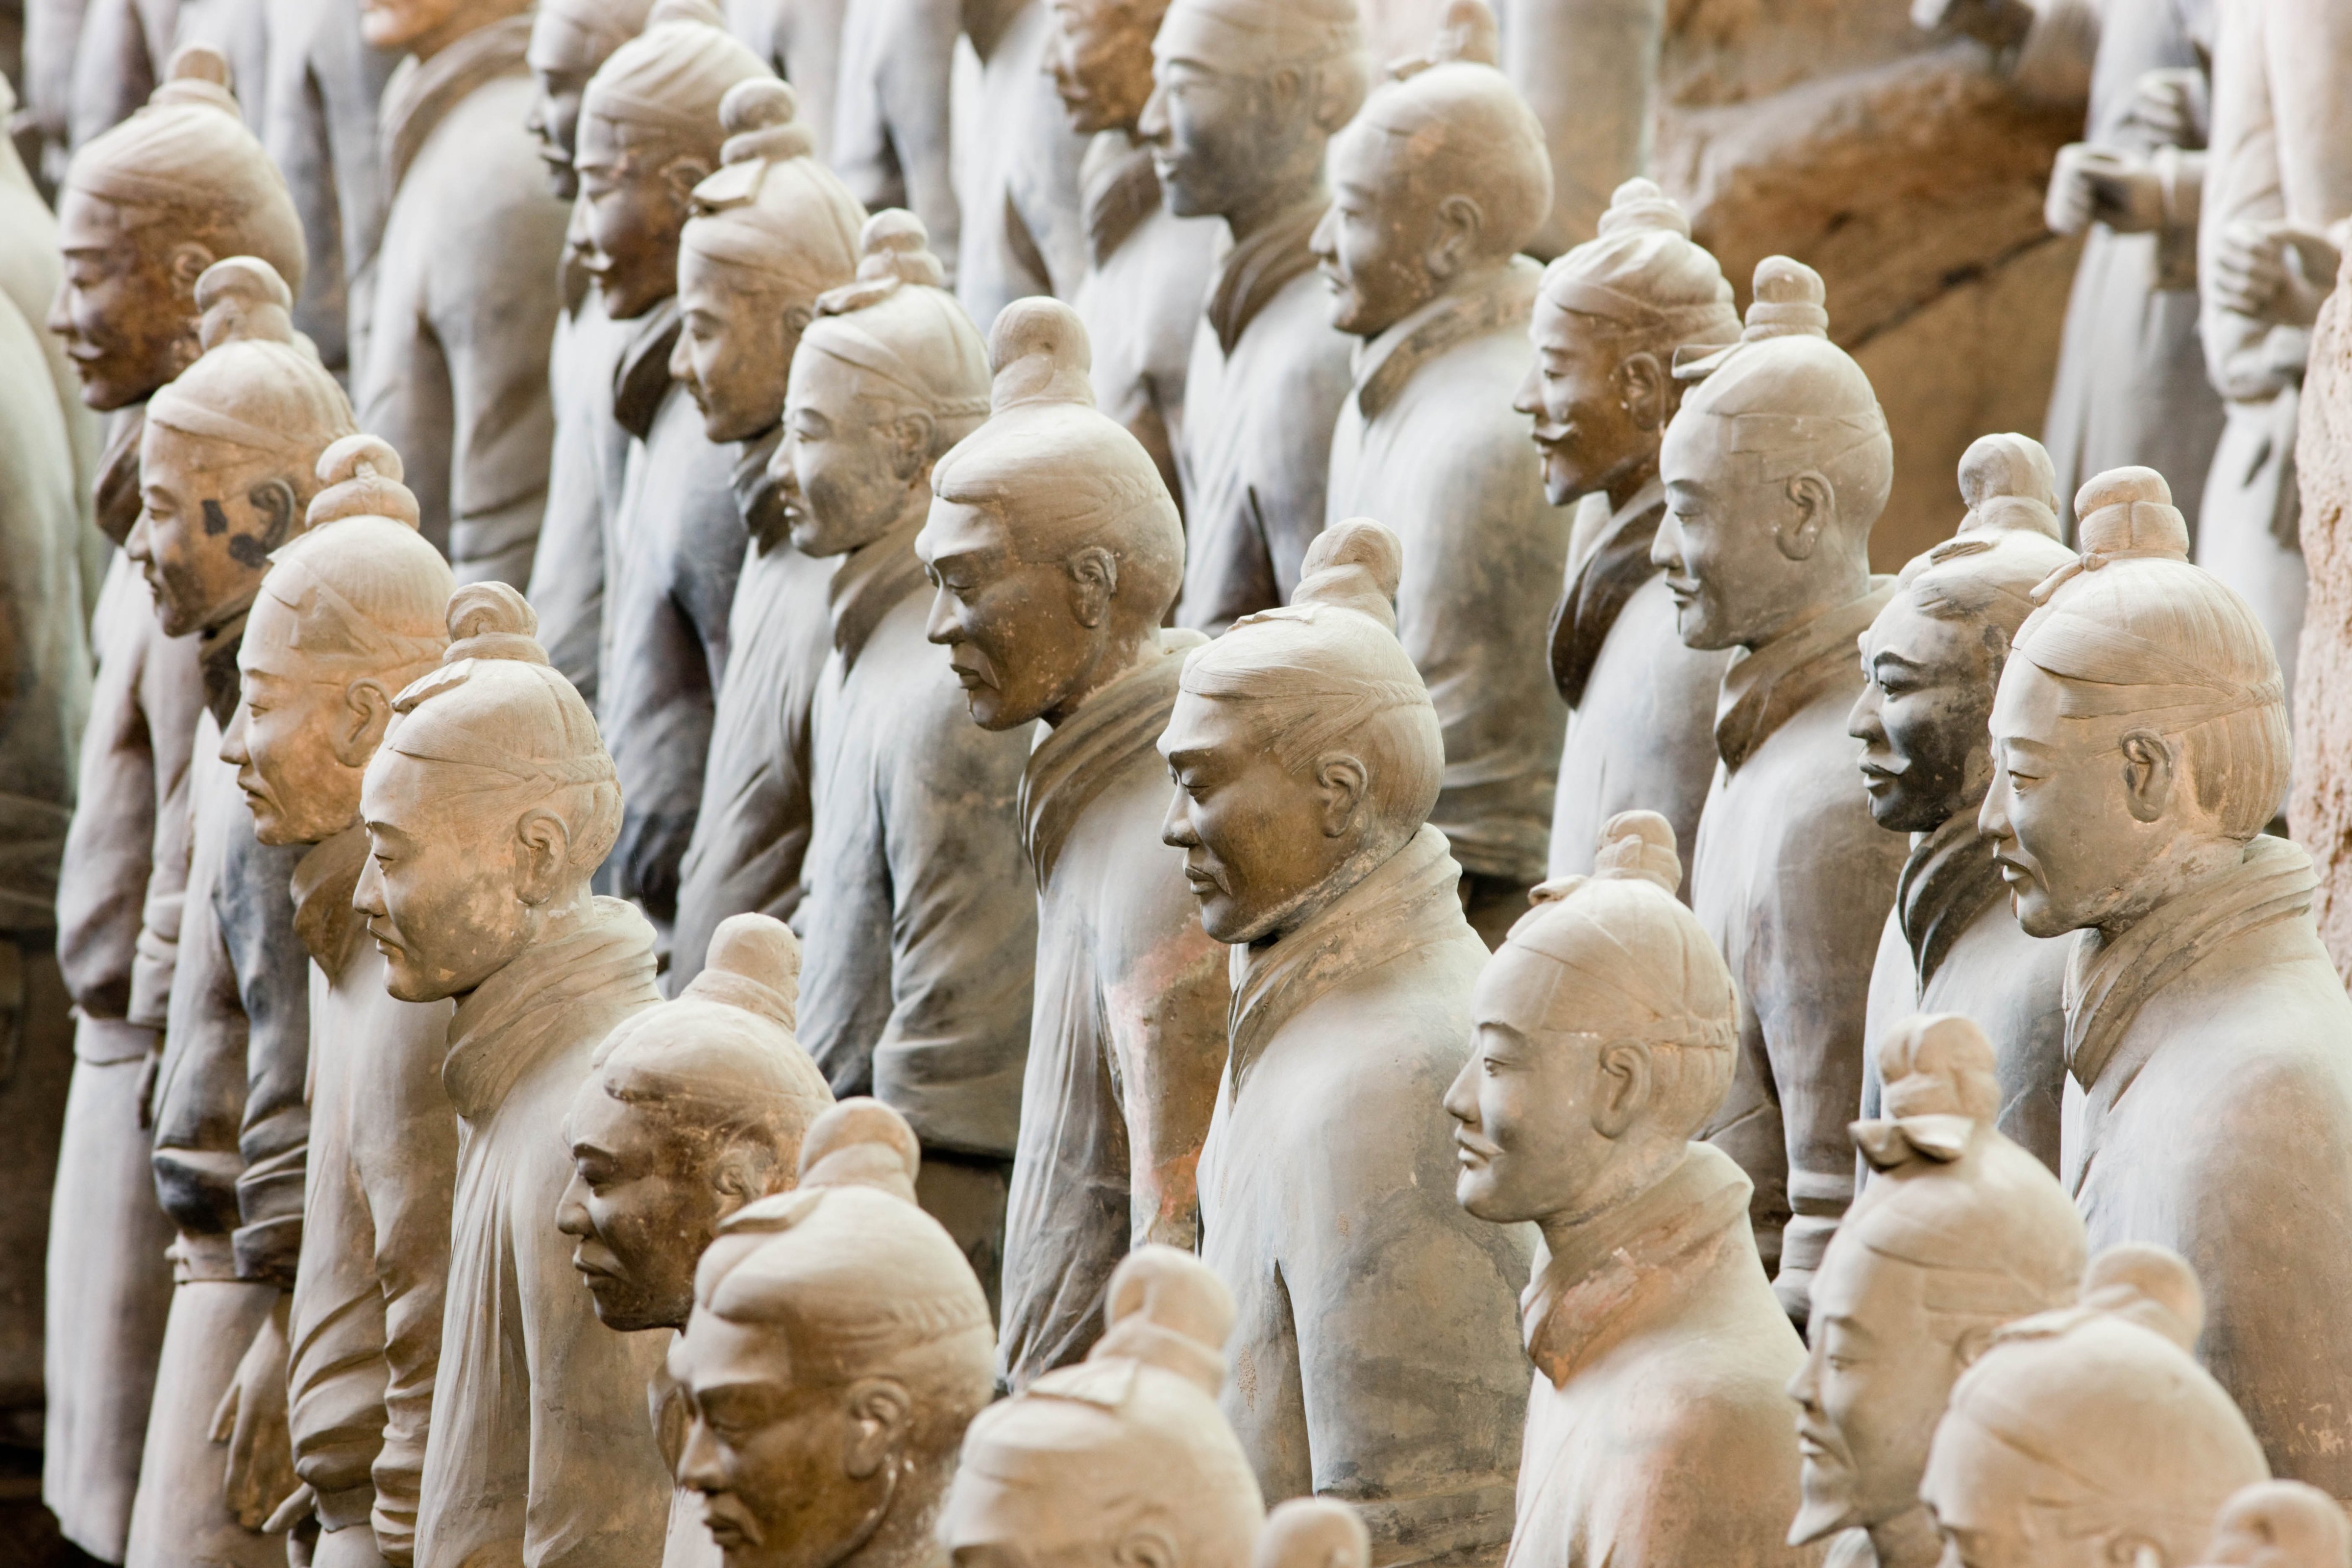 Infantry men figures at Qin Museum, exhibition halls of Terracotta Warriors, Xian, China. (Tim Graham—Getty Images)